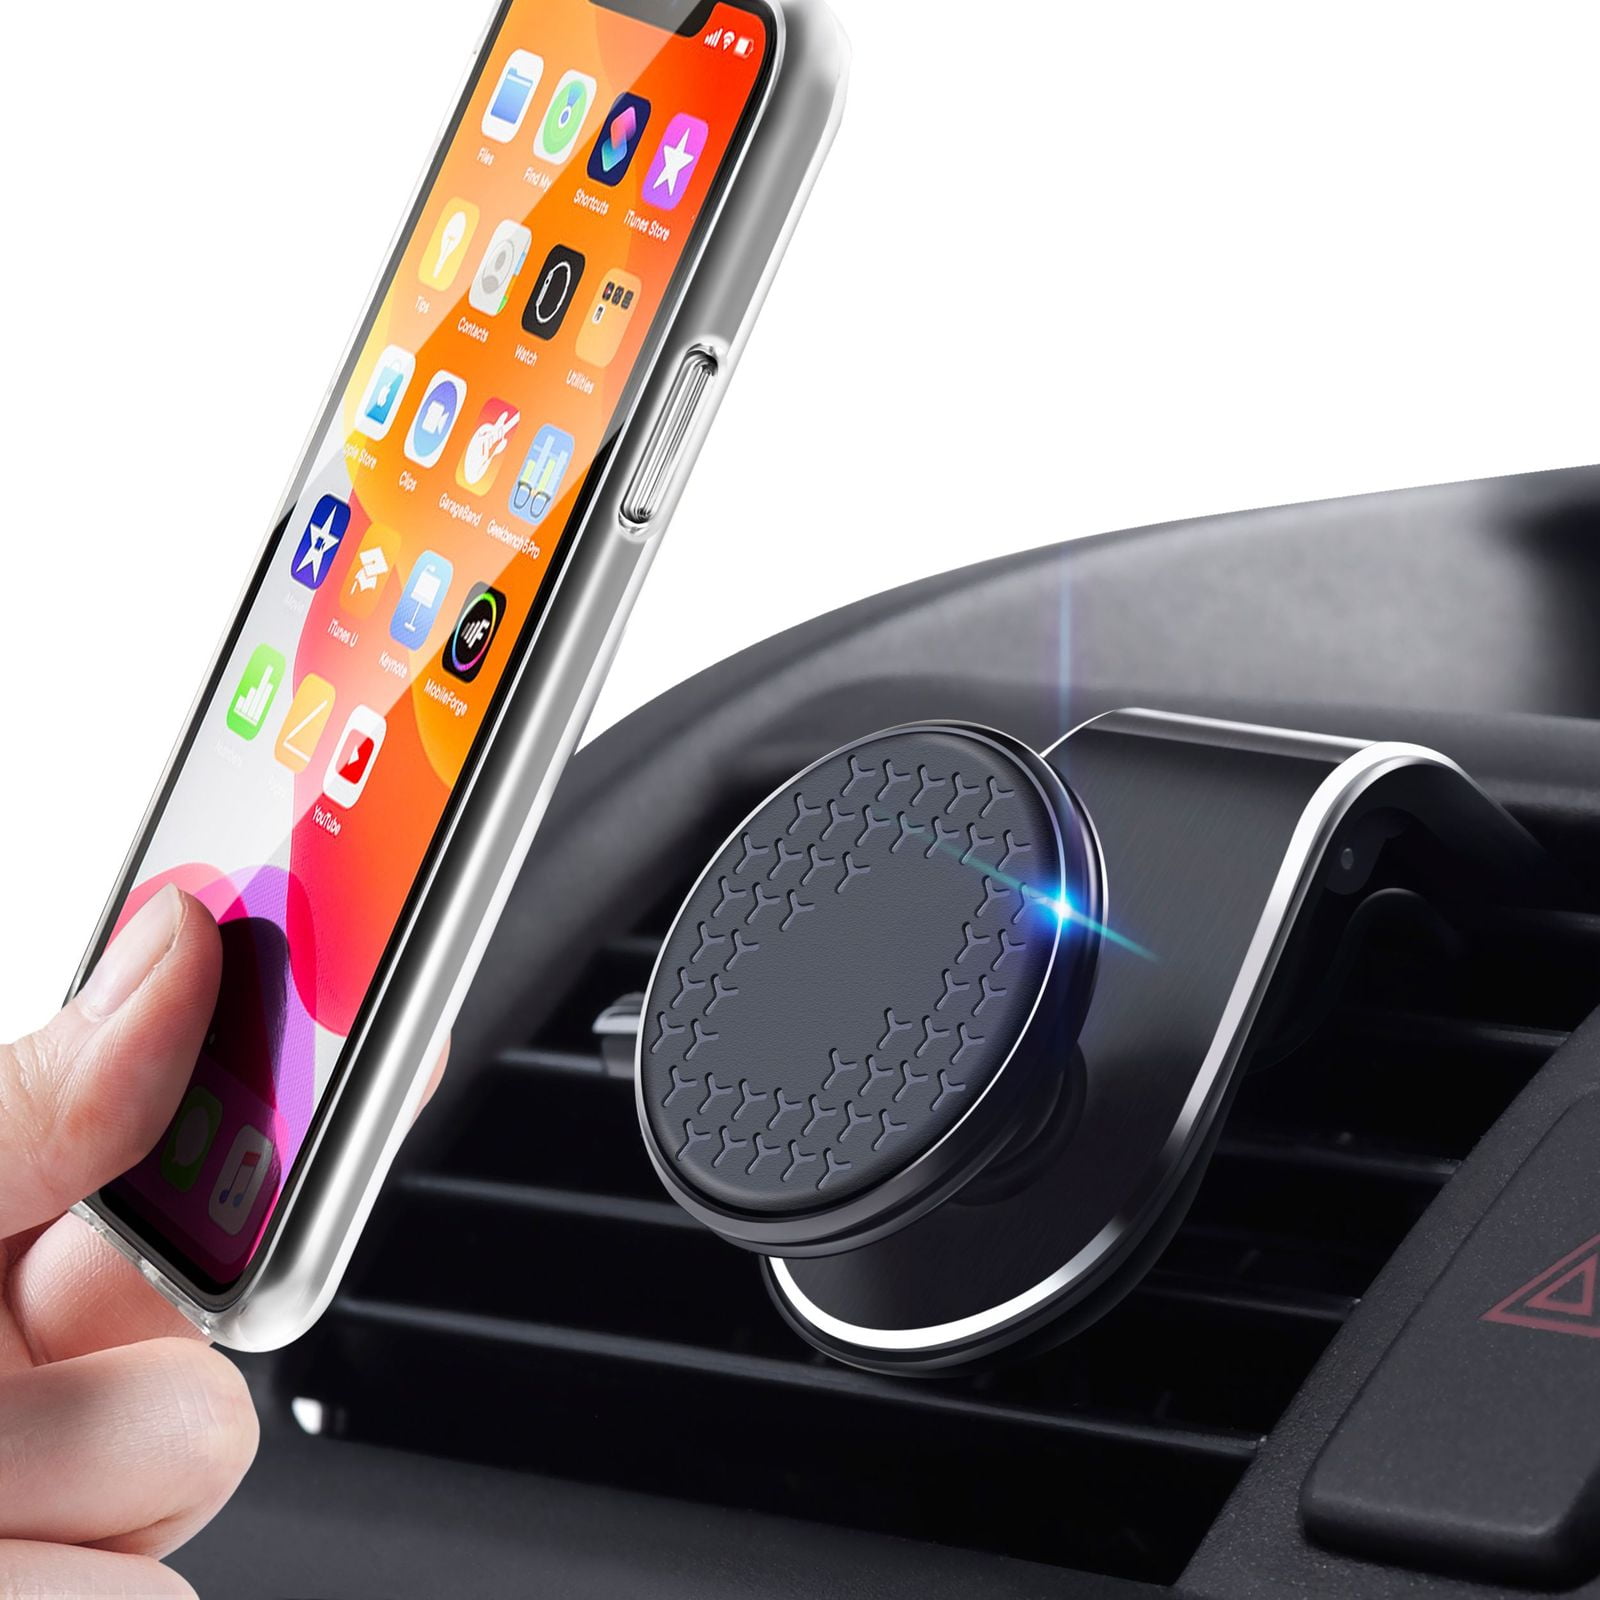 Magnetic Magnet Car Phone Holder/Air Vent Mount Cradle For Apple iPhone 11 Pro